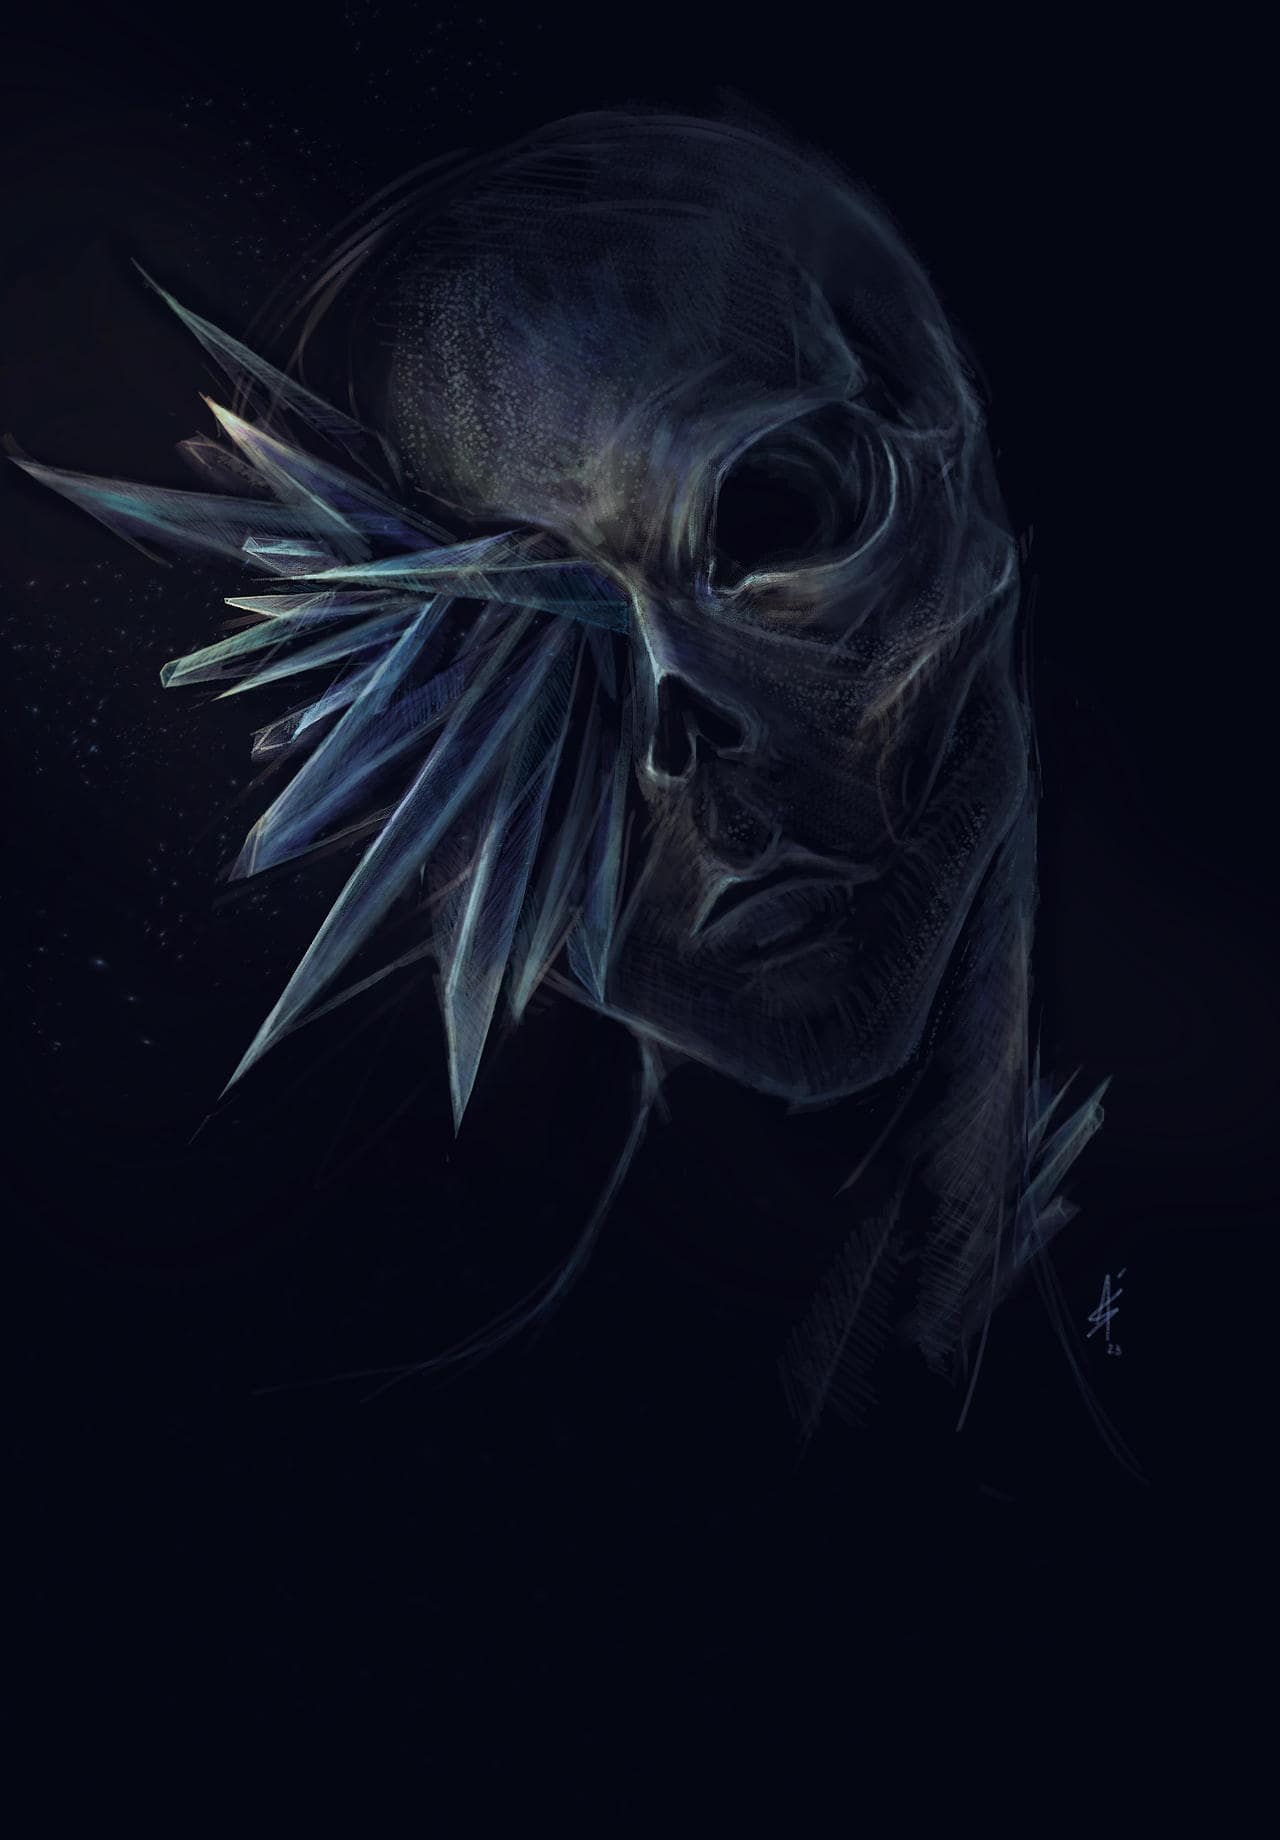 Crystal Undead Soldier by 1oneAS on DeviantArt